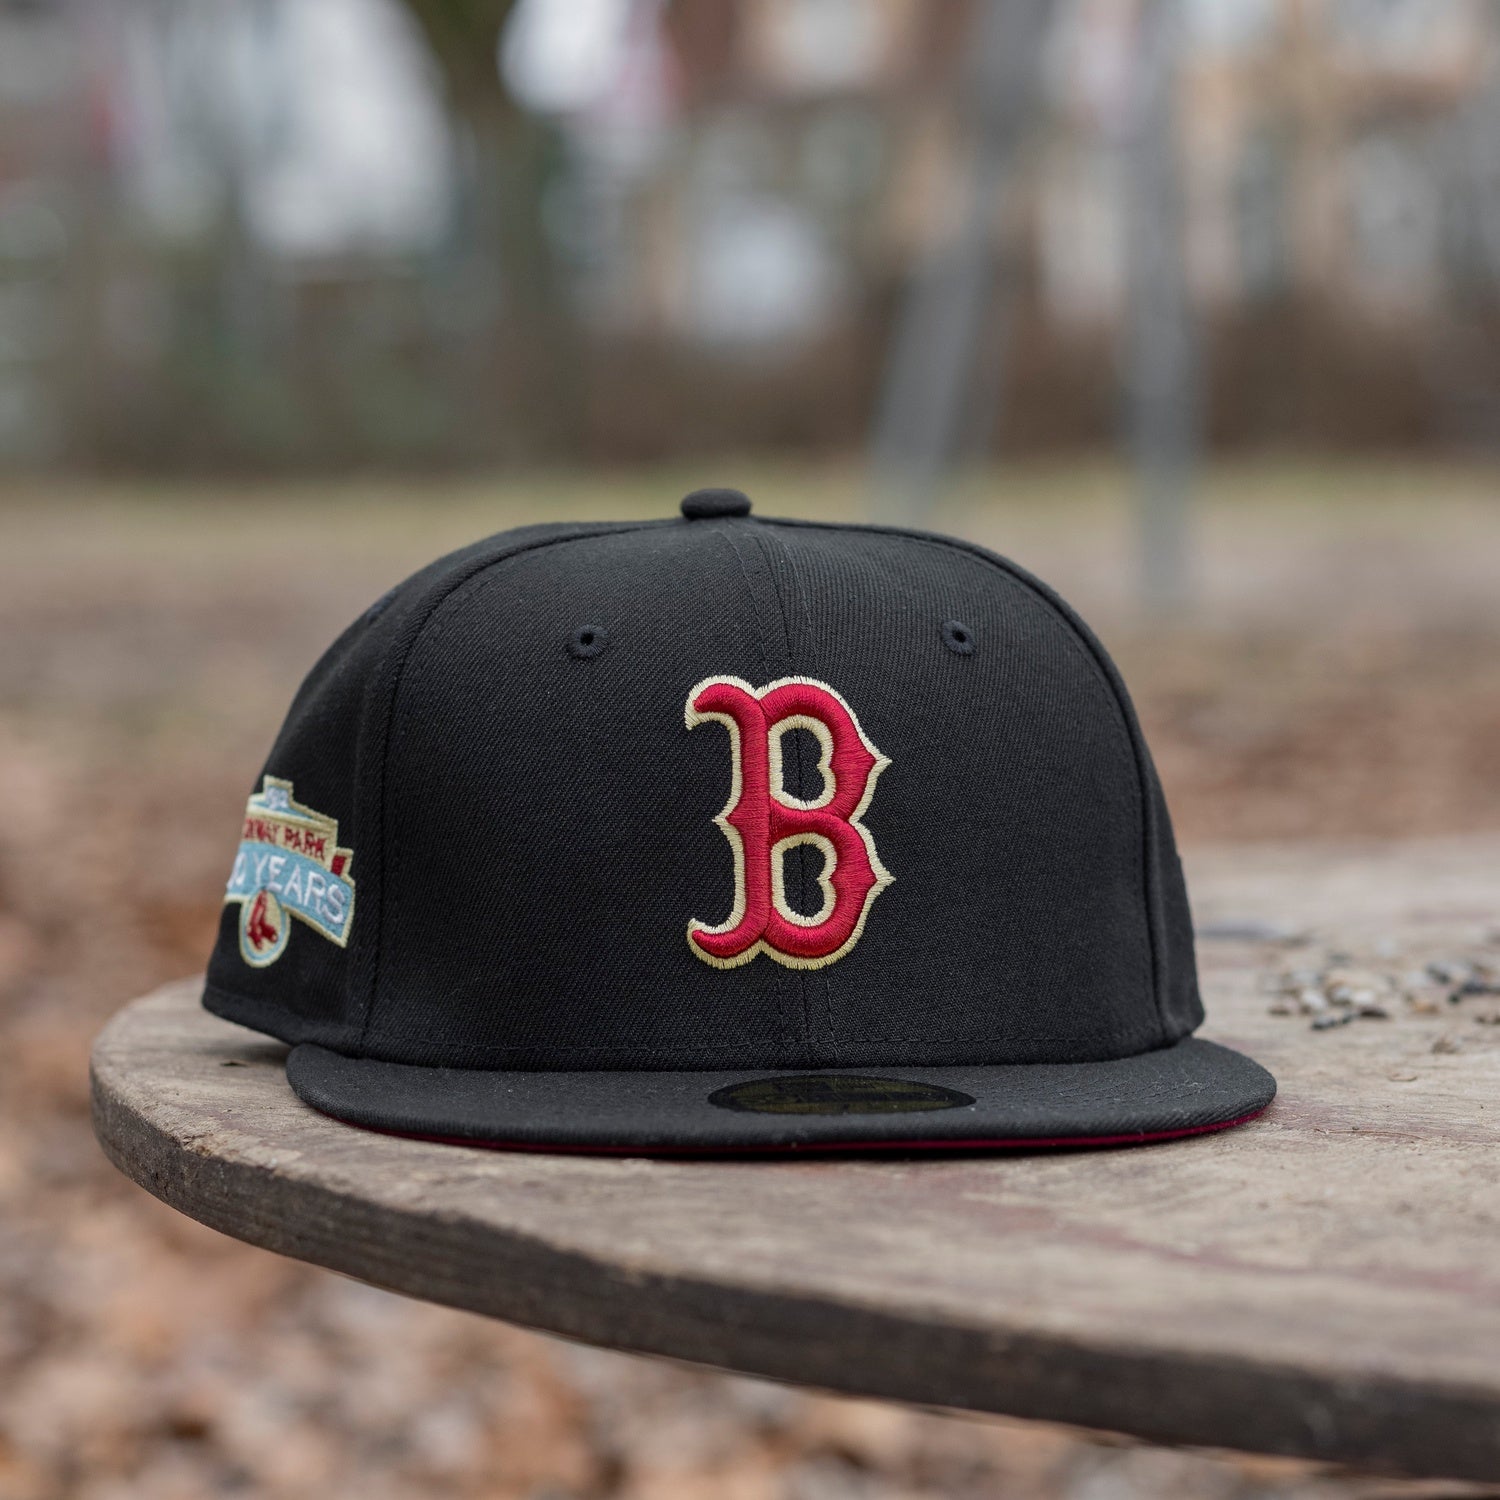 Exclusive fitted caps, Snapbacks and Teams - best selection at FAM 